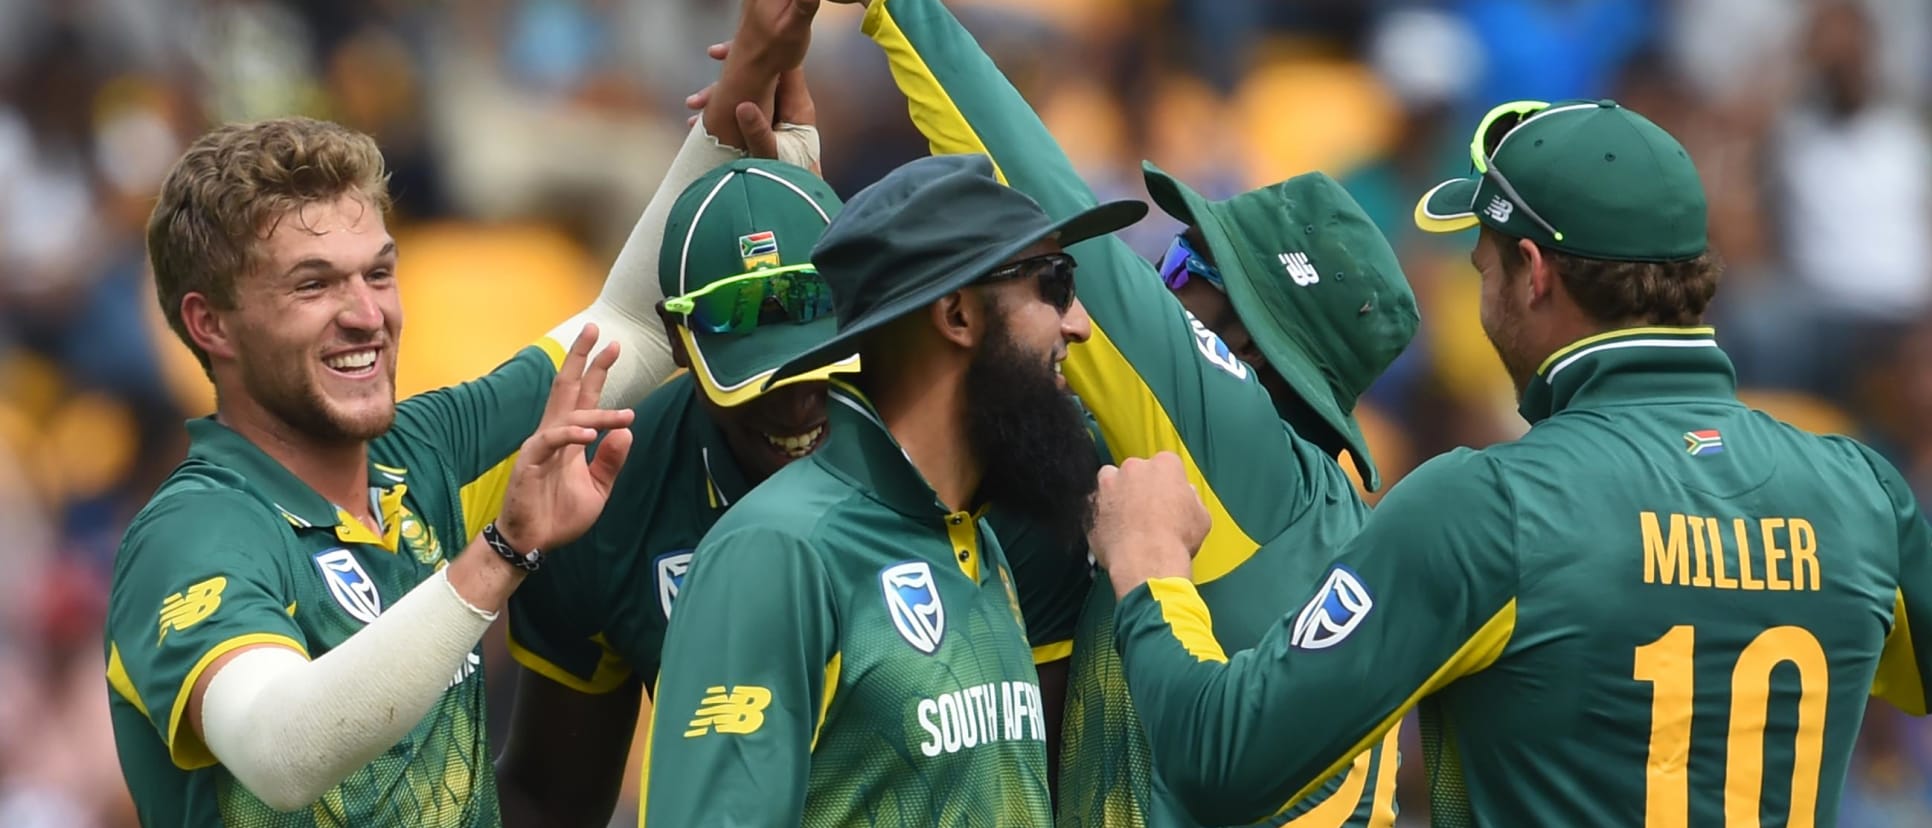 South Africa had Sri Lanka reduced to 81/4 within 12 overs